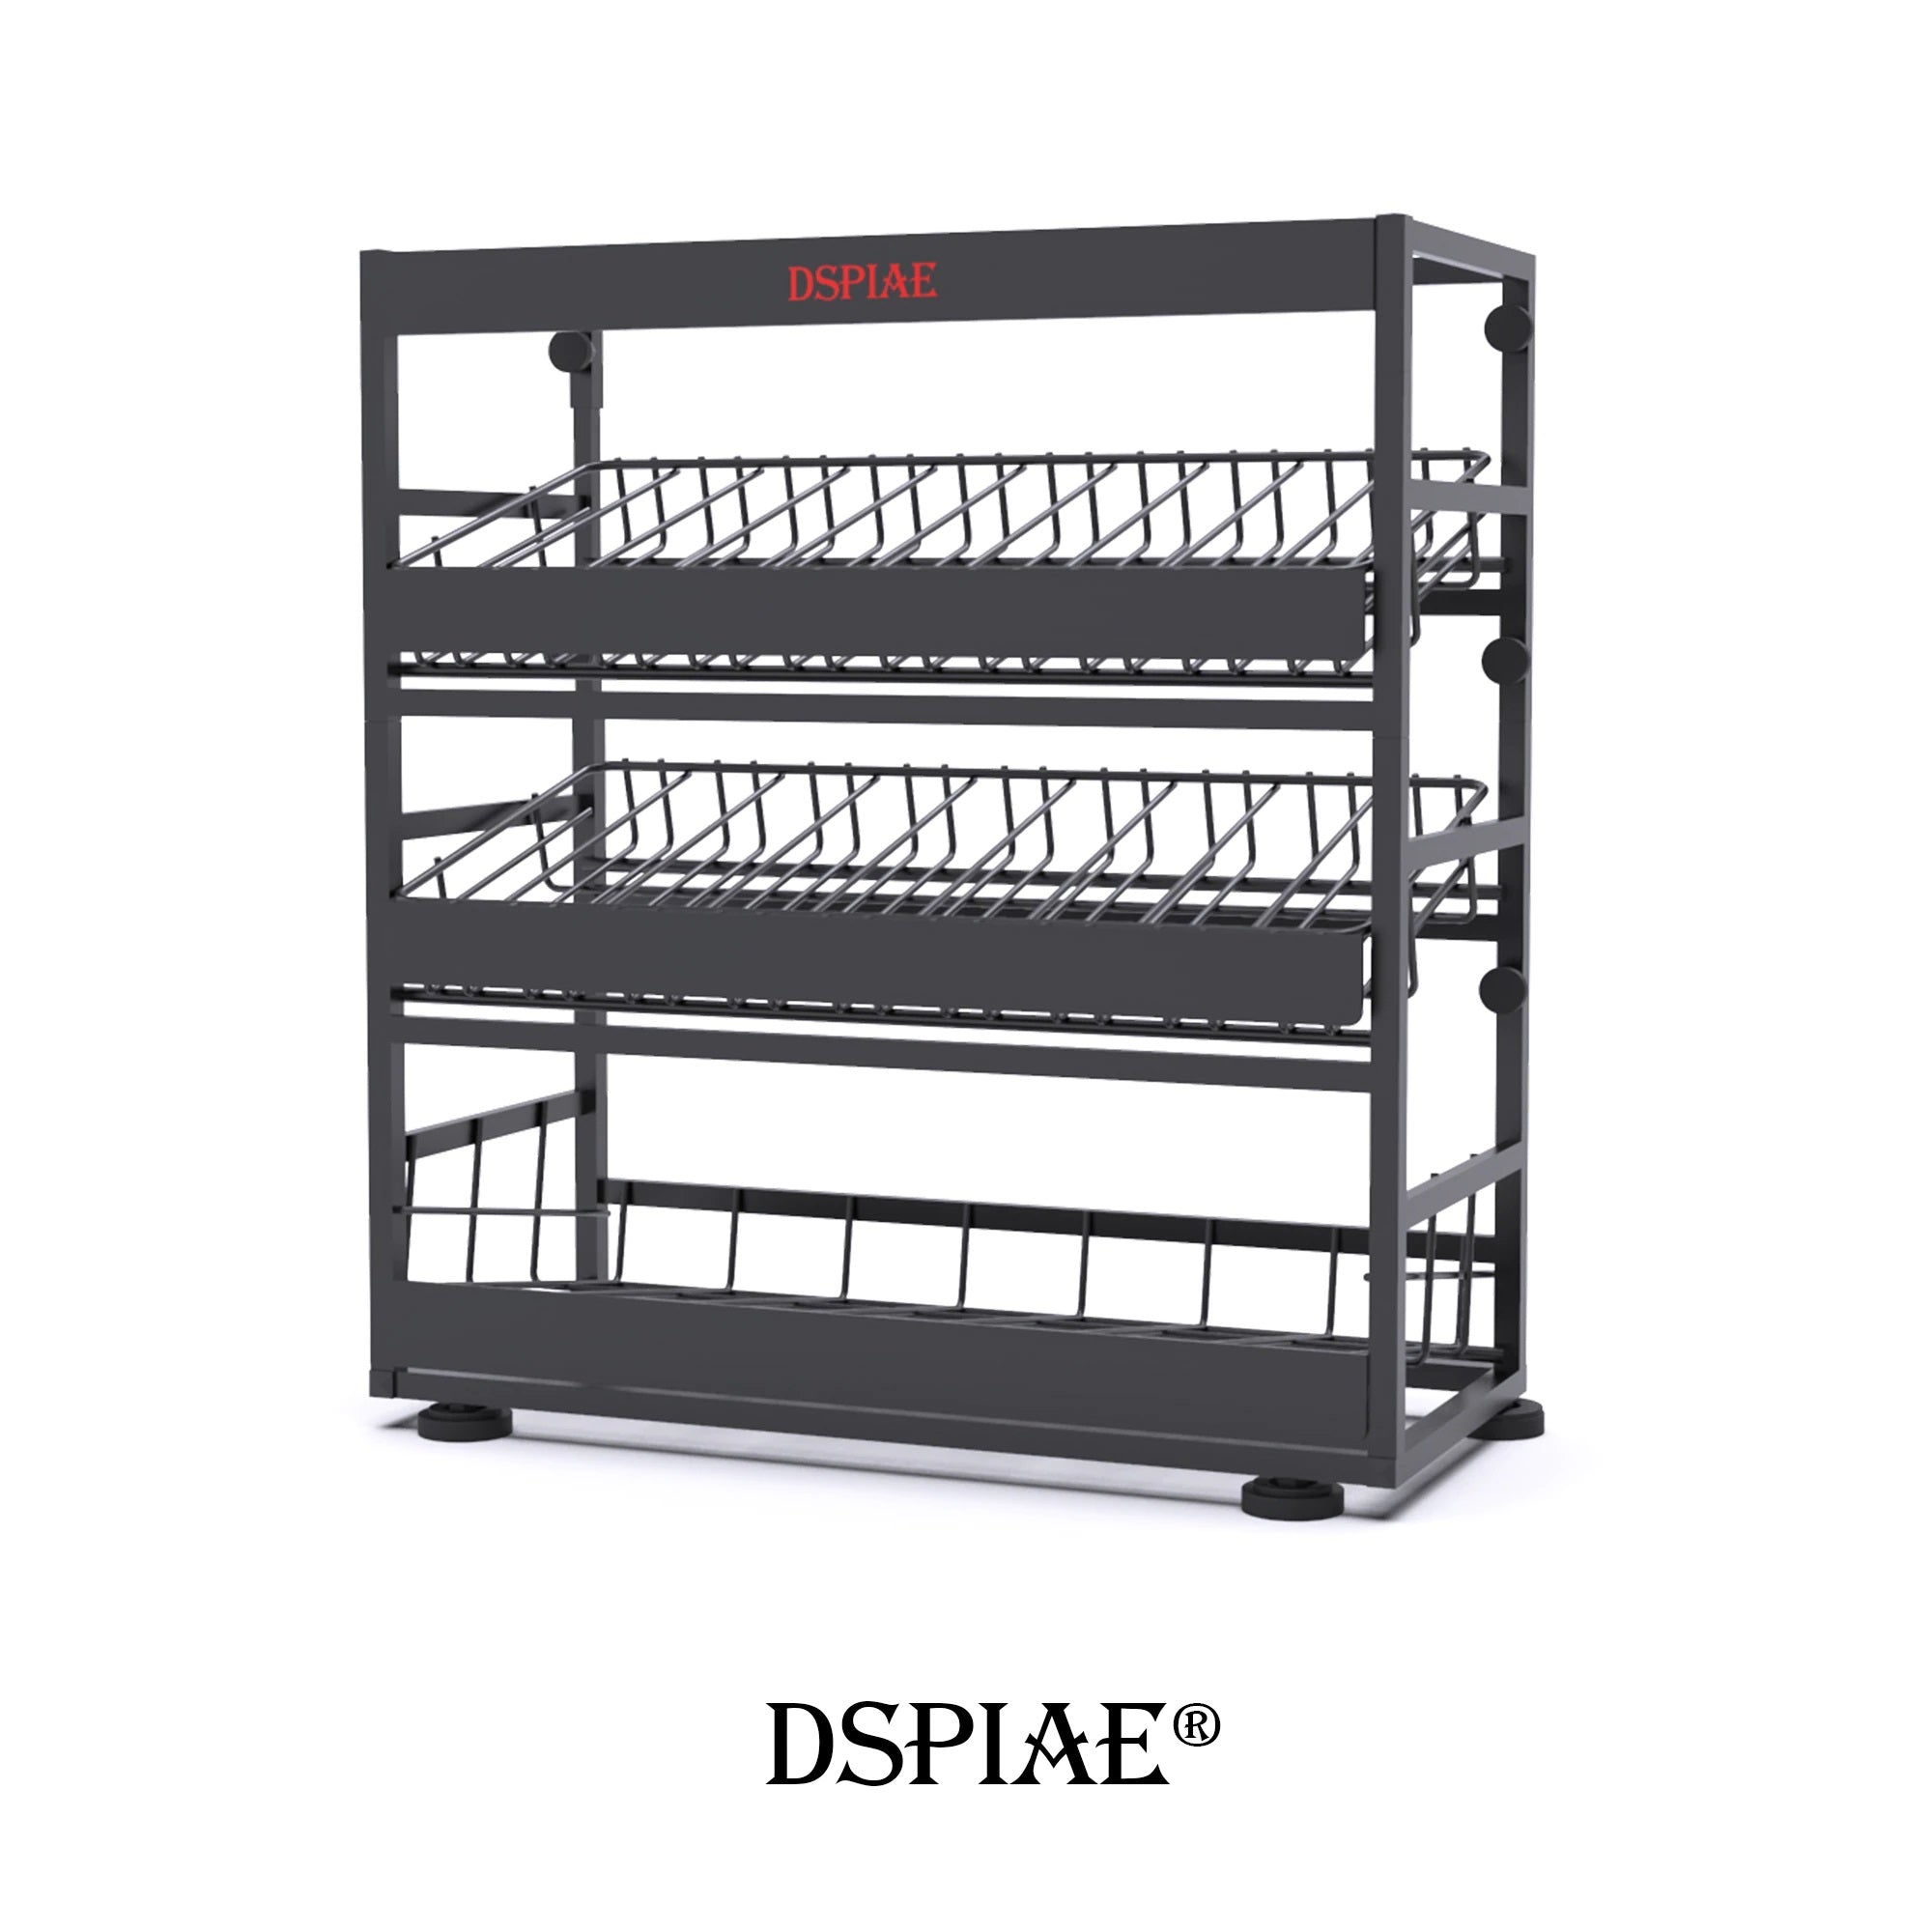 DSPIAE - MPR Personal Paint Rack